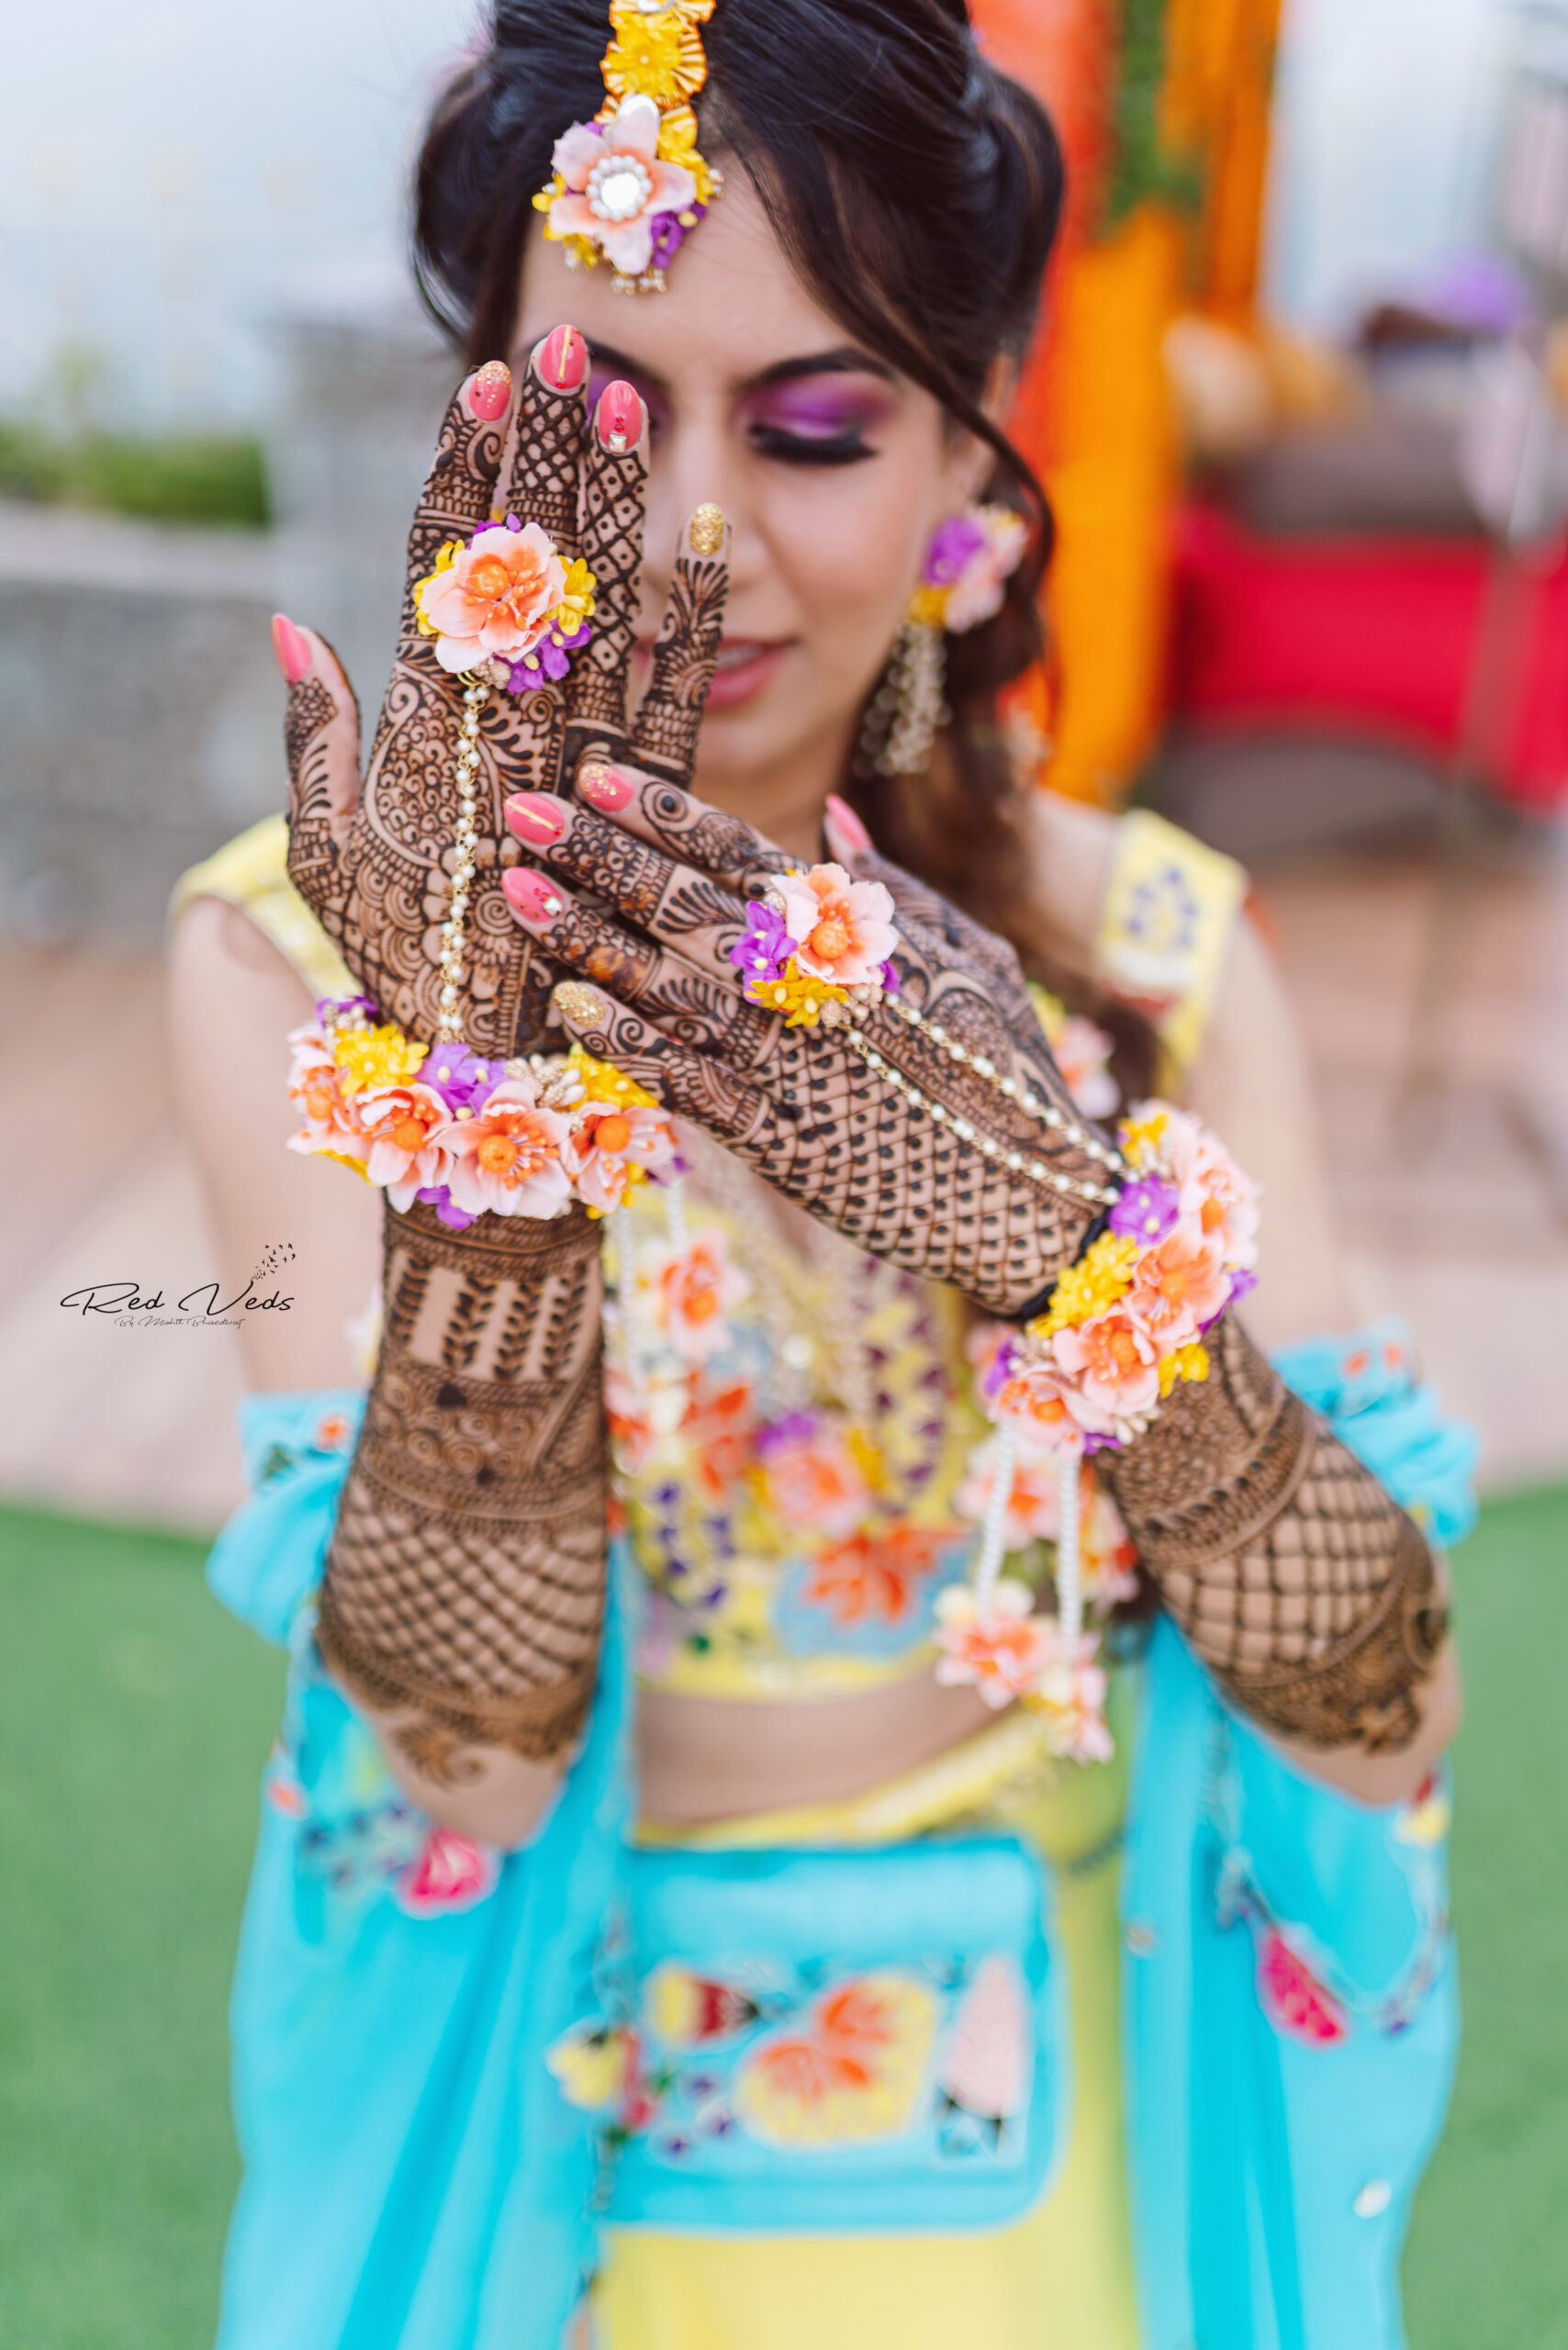 Tips On How To Flaunt Your Bridal Mehendi Pictures | Bridal photography  poses, Bride photos poses, Indian wedding photography poses